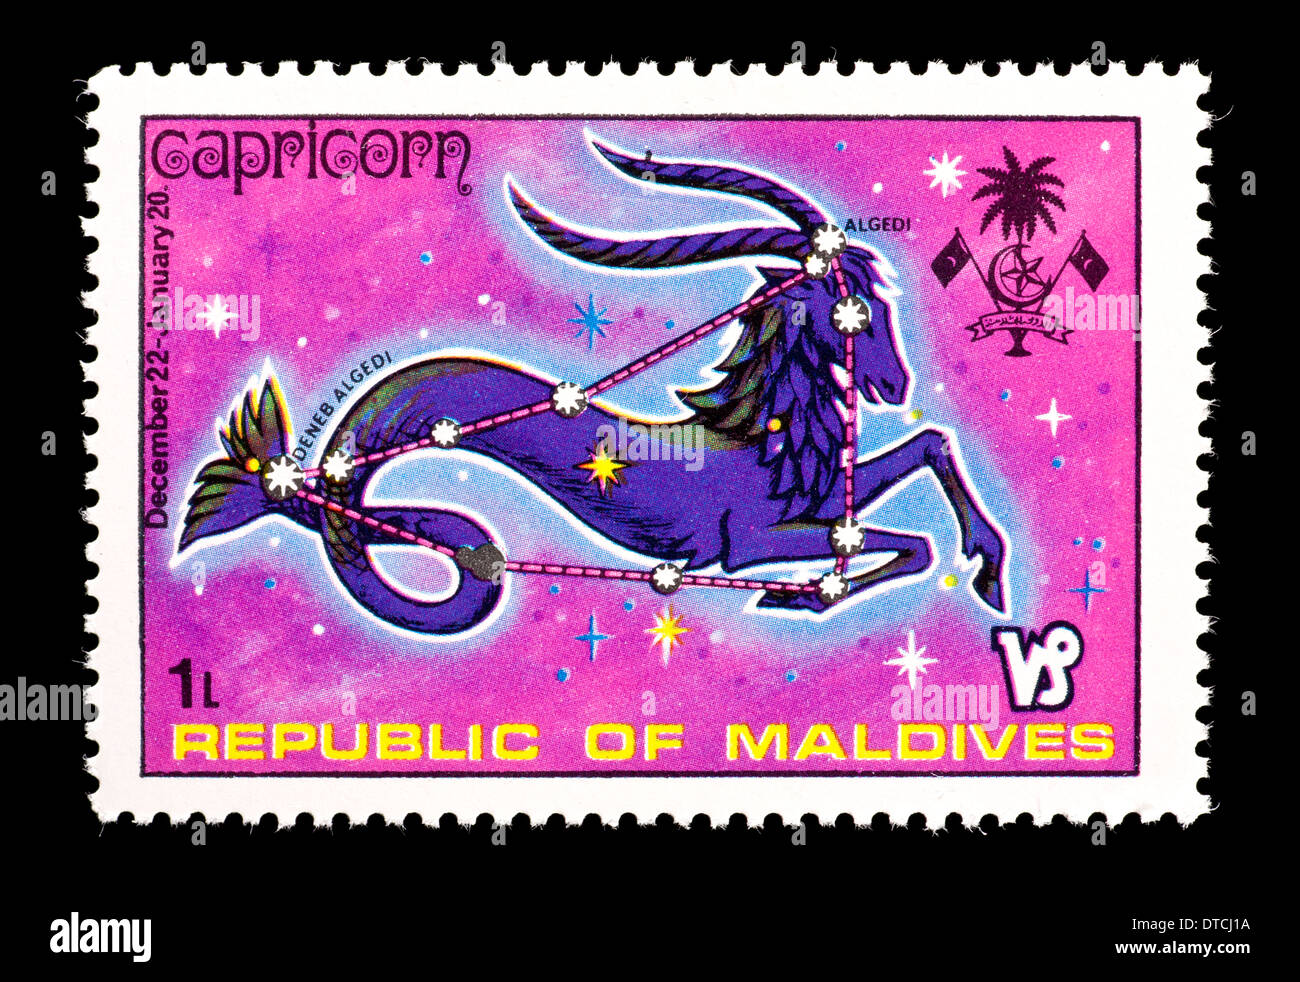 Postage stamp from the Maldive Islands depicting the constellation Capricorn. Stock Photo